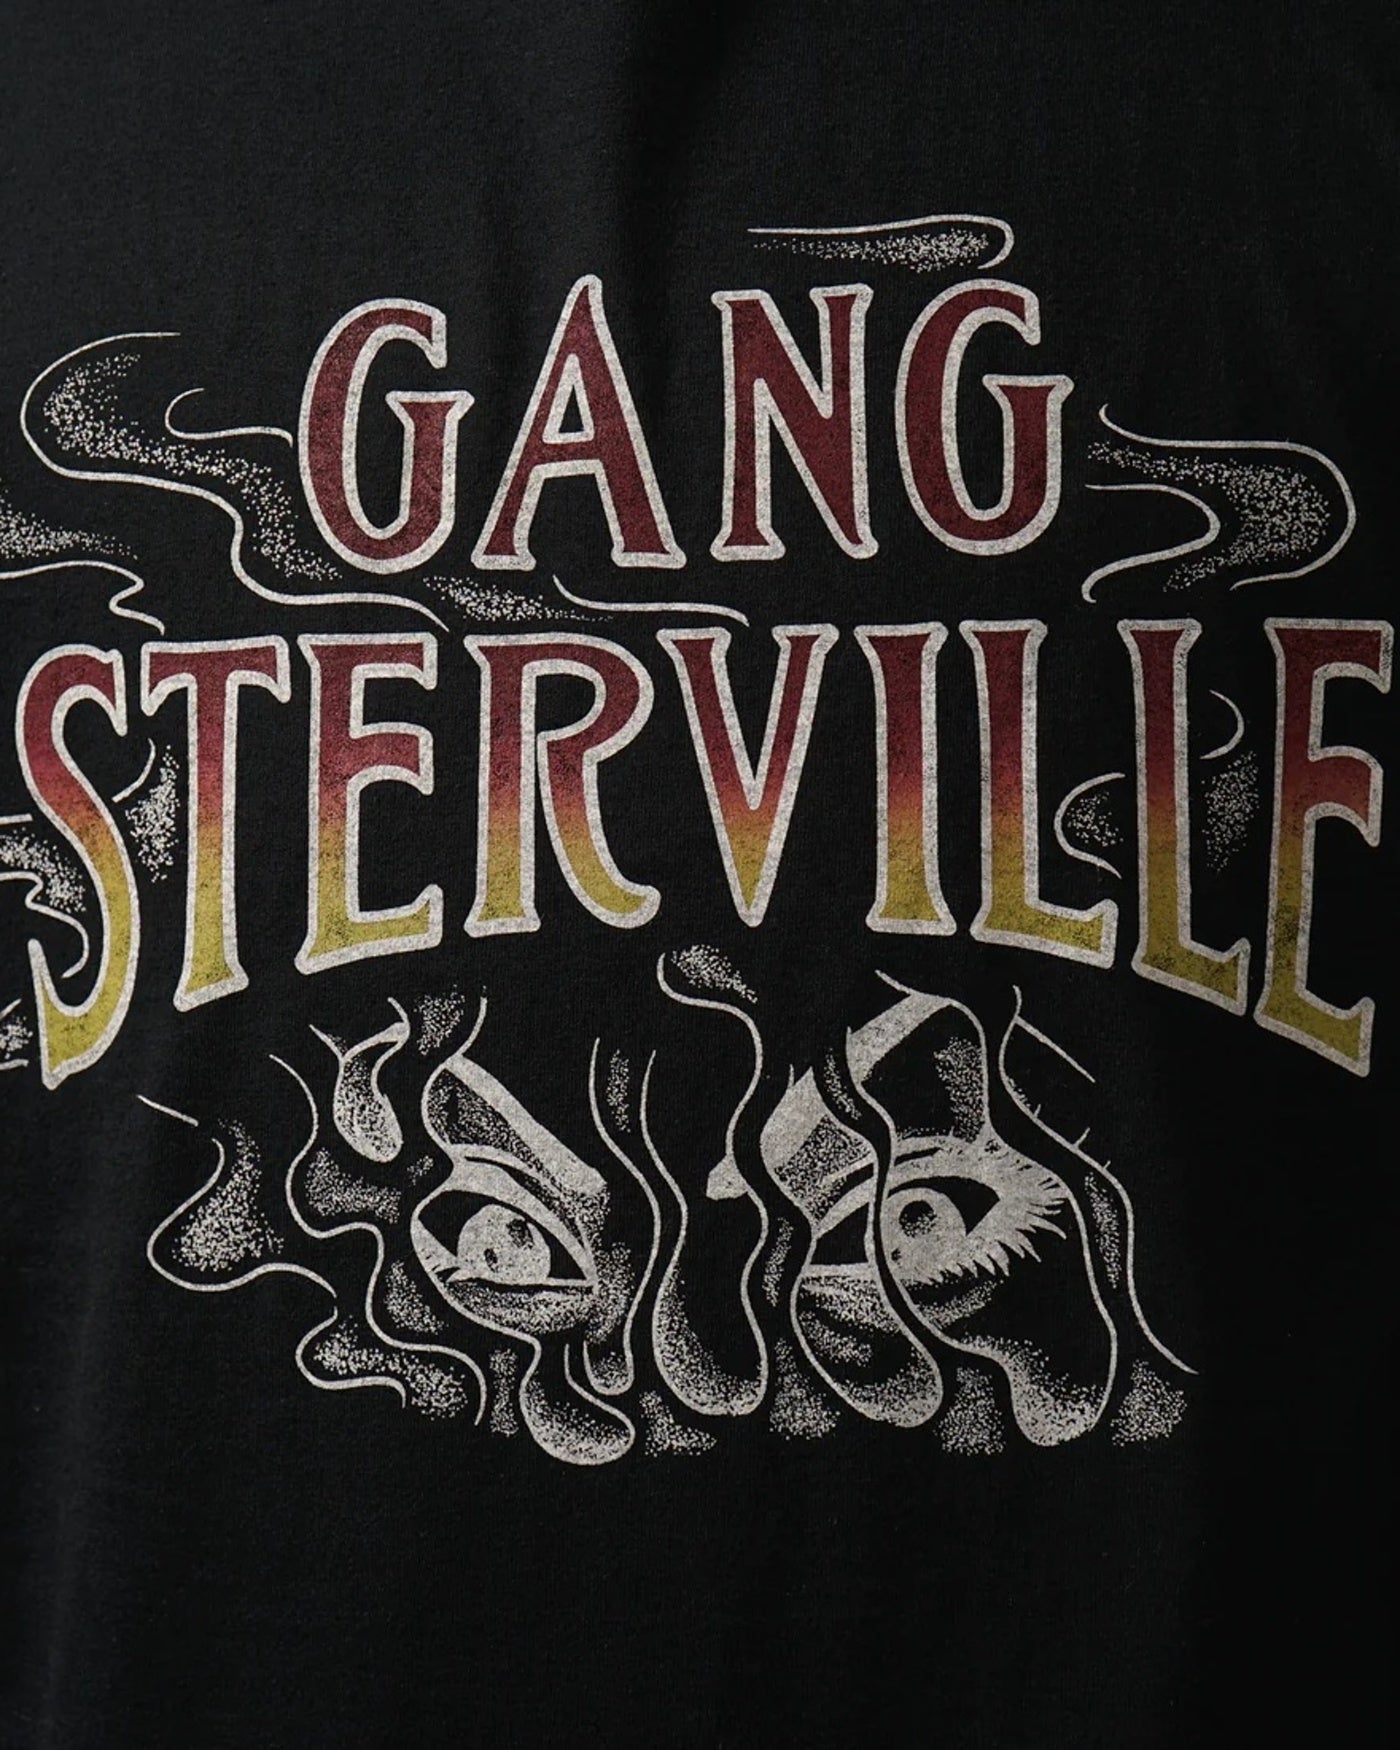 GANGSTERVILLE | TATTOO EYES - S/S T-SHIRTS - Black